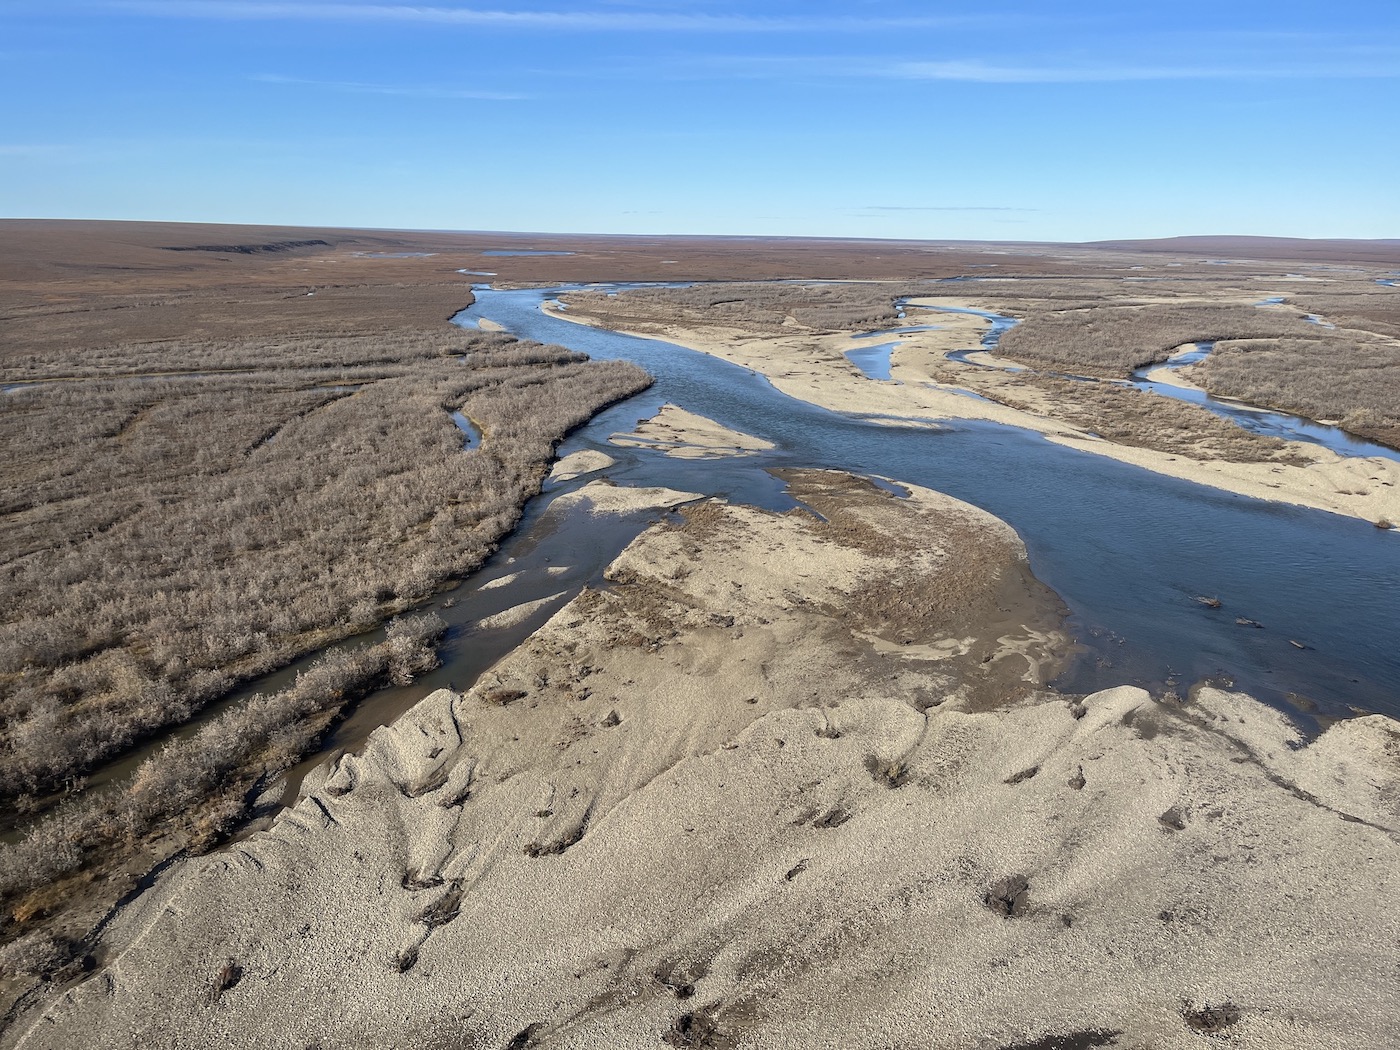 In this aerial photo, a clear river, braided by gravel bars, flows through a brown tundra landscape.